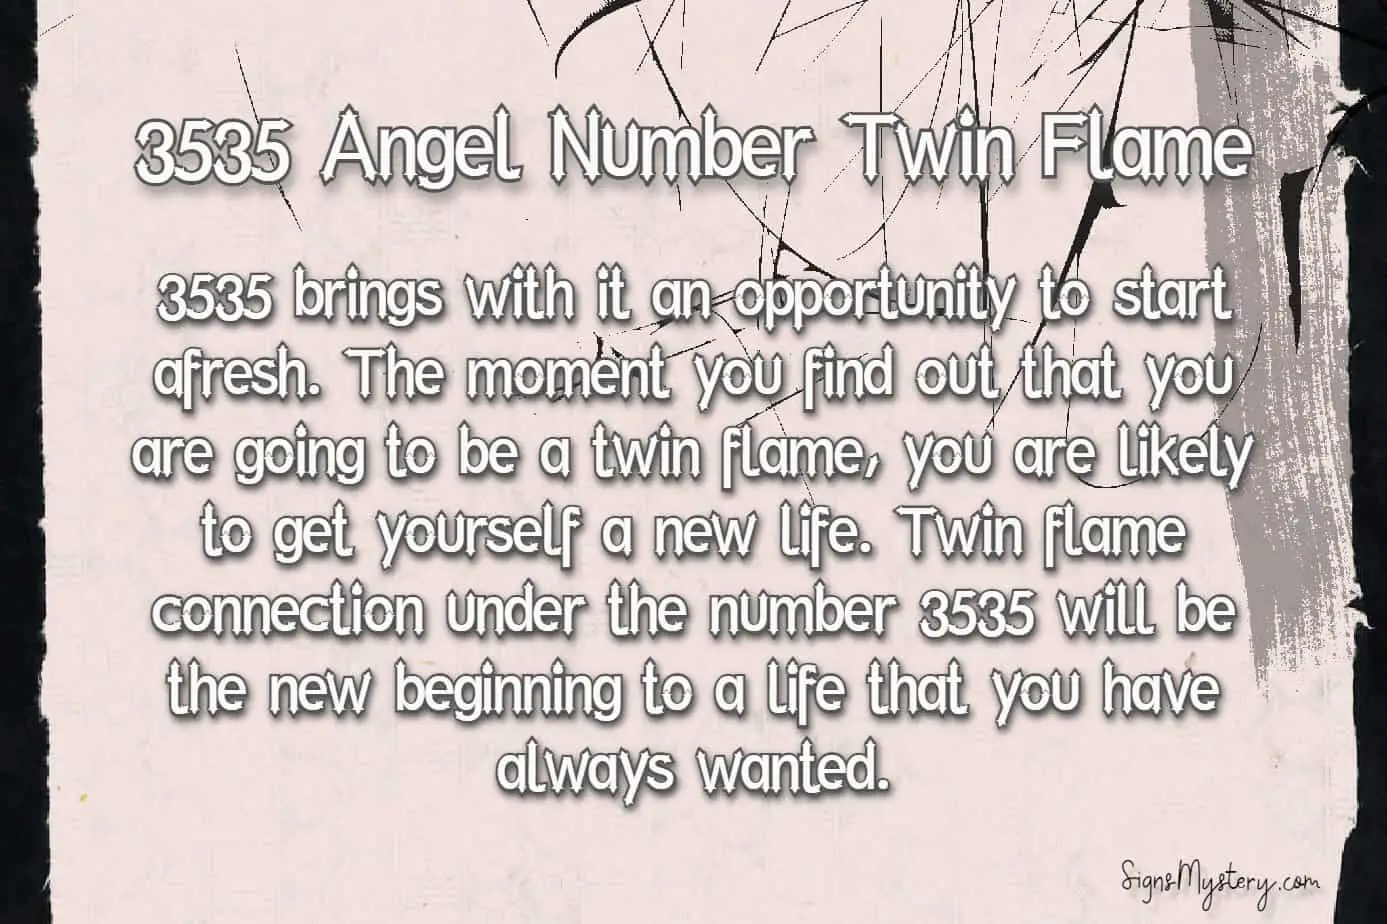 3535 angel number twin flame